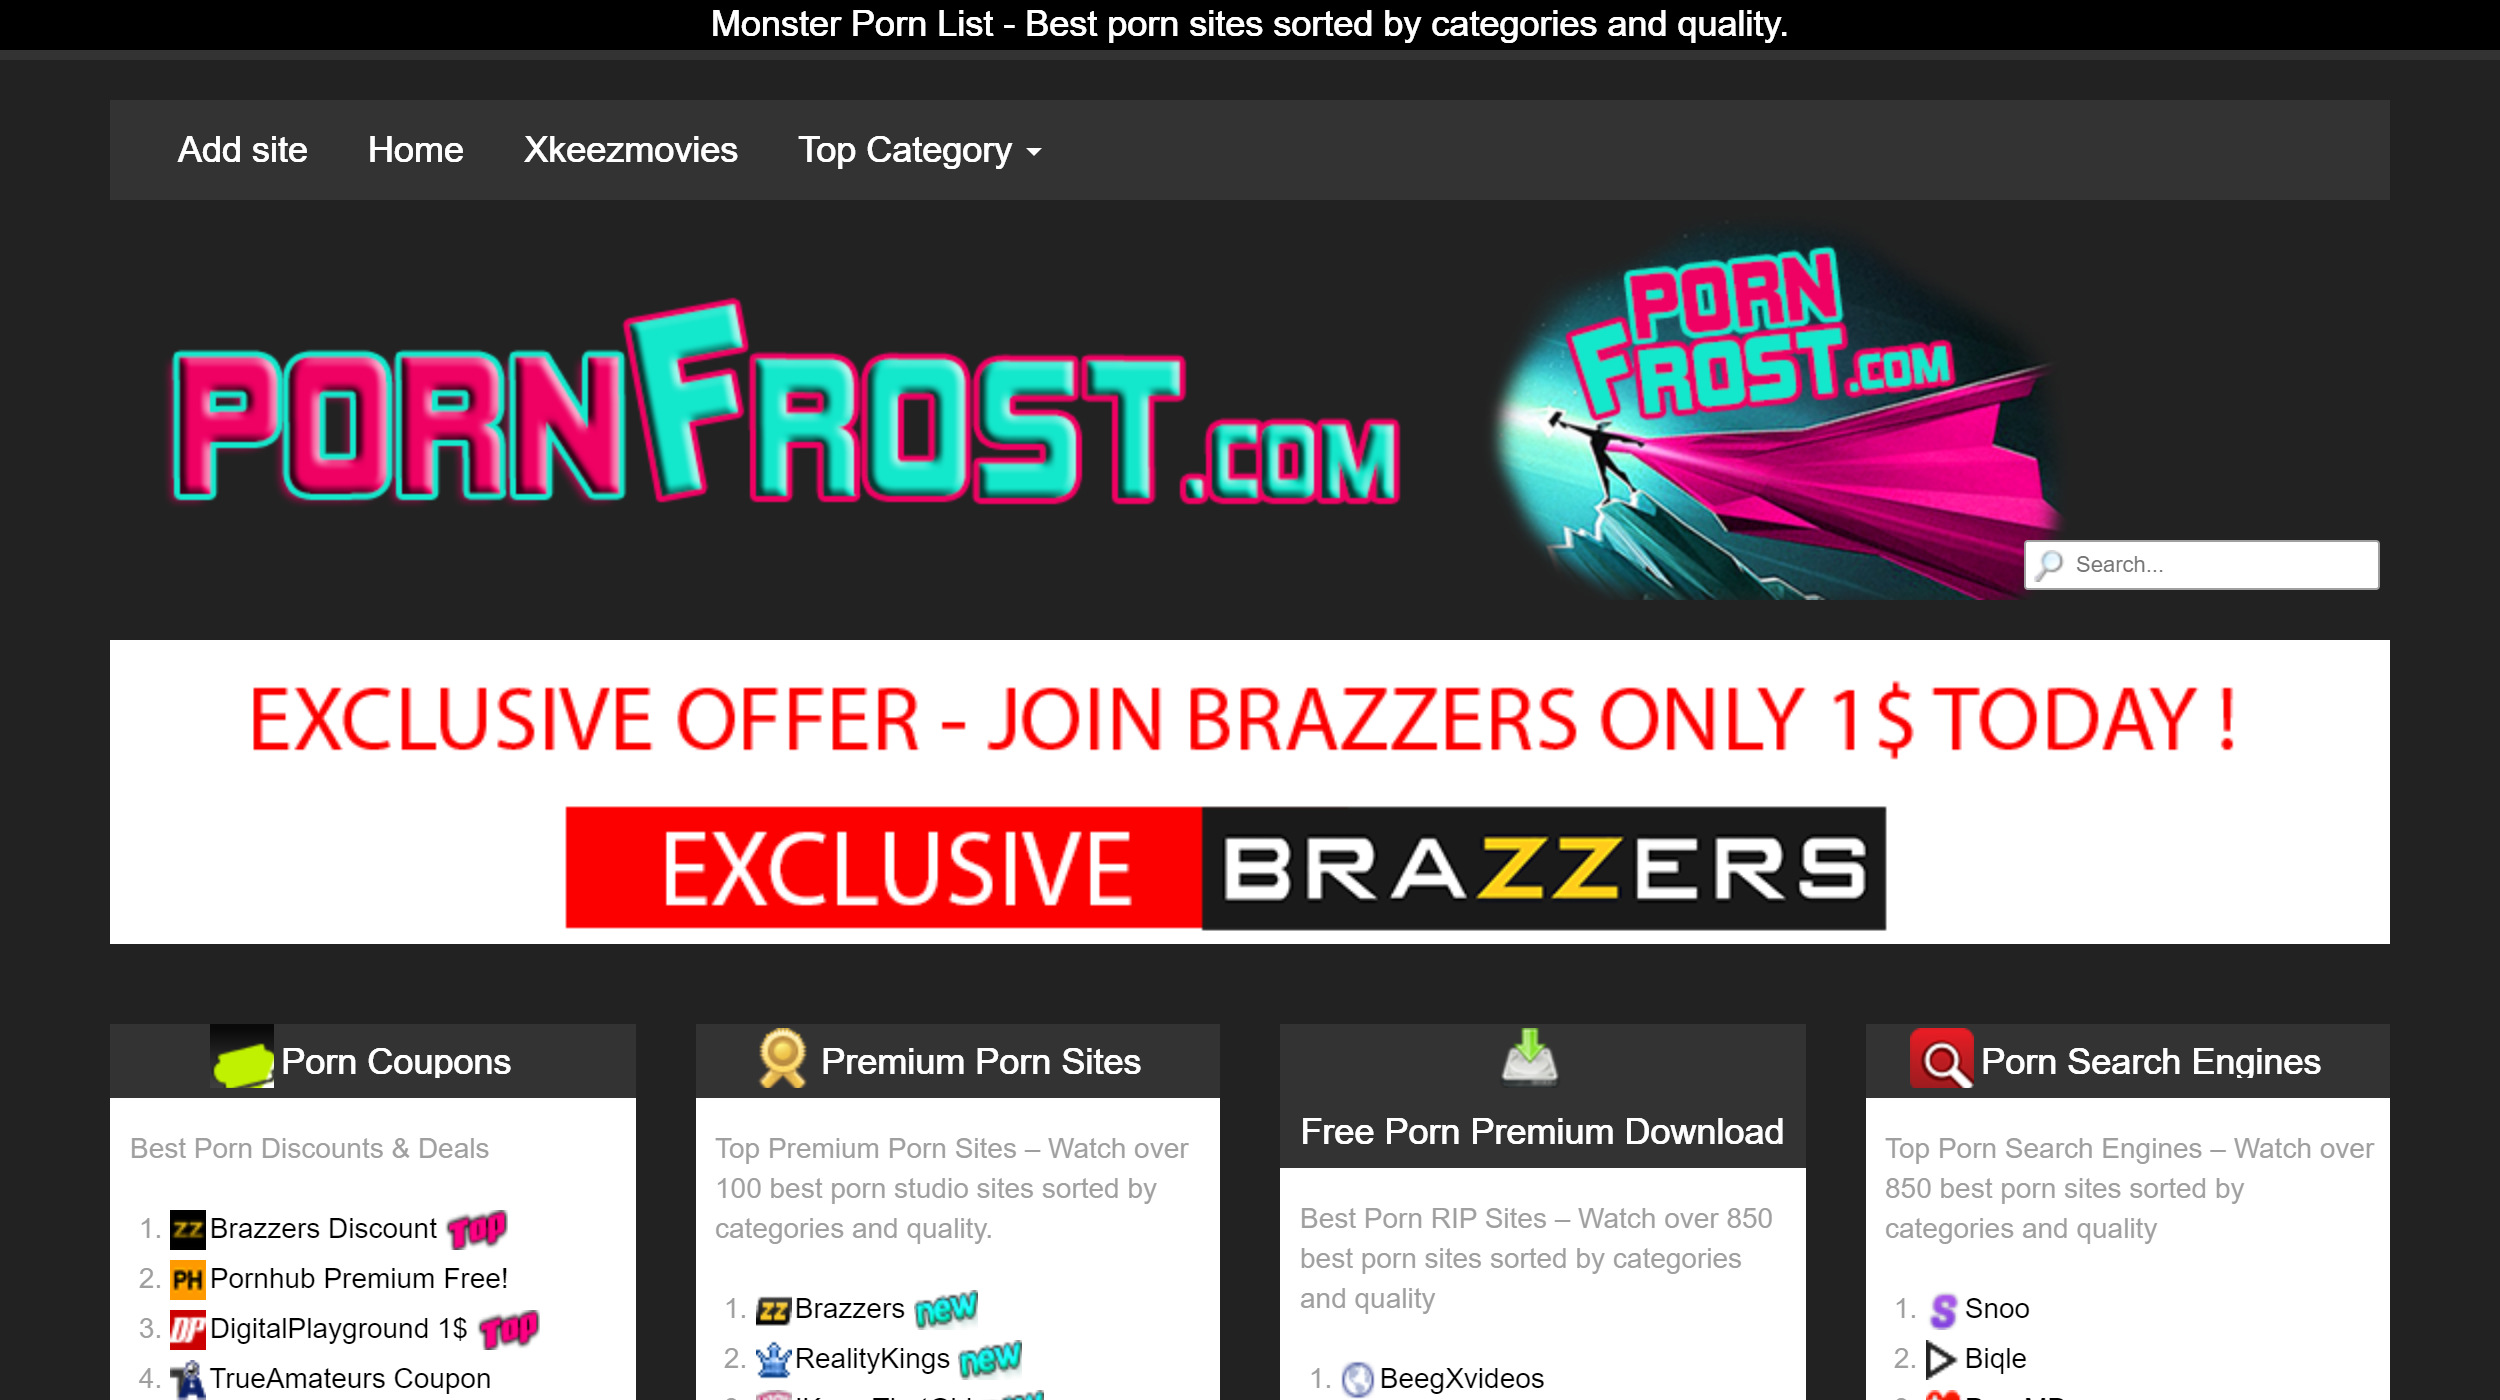 Porn Frost